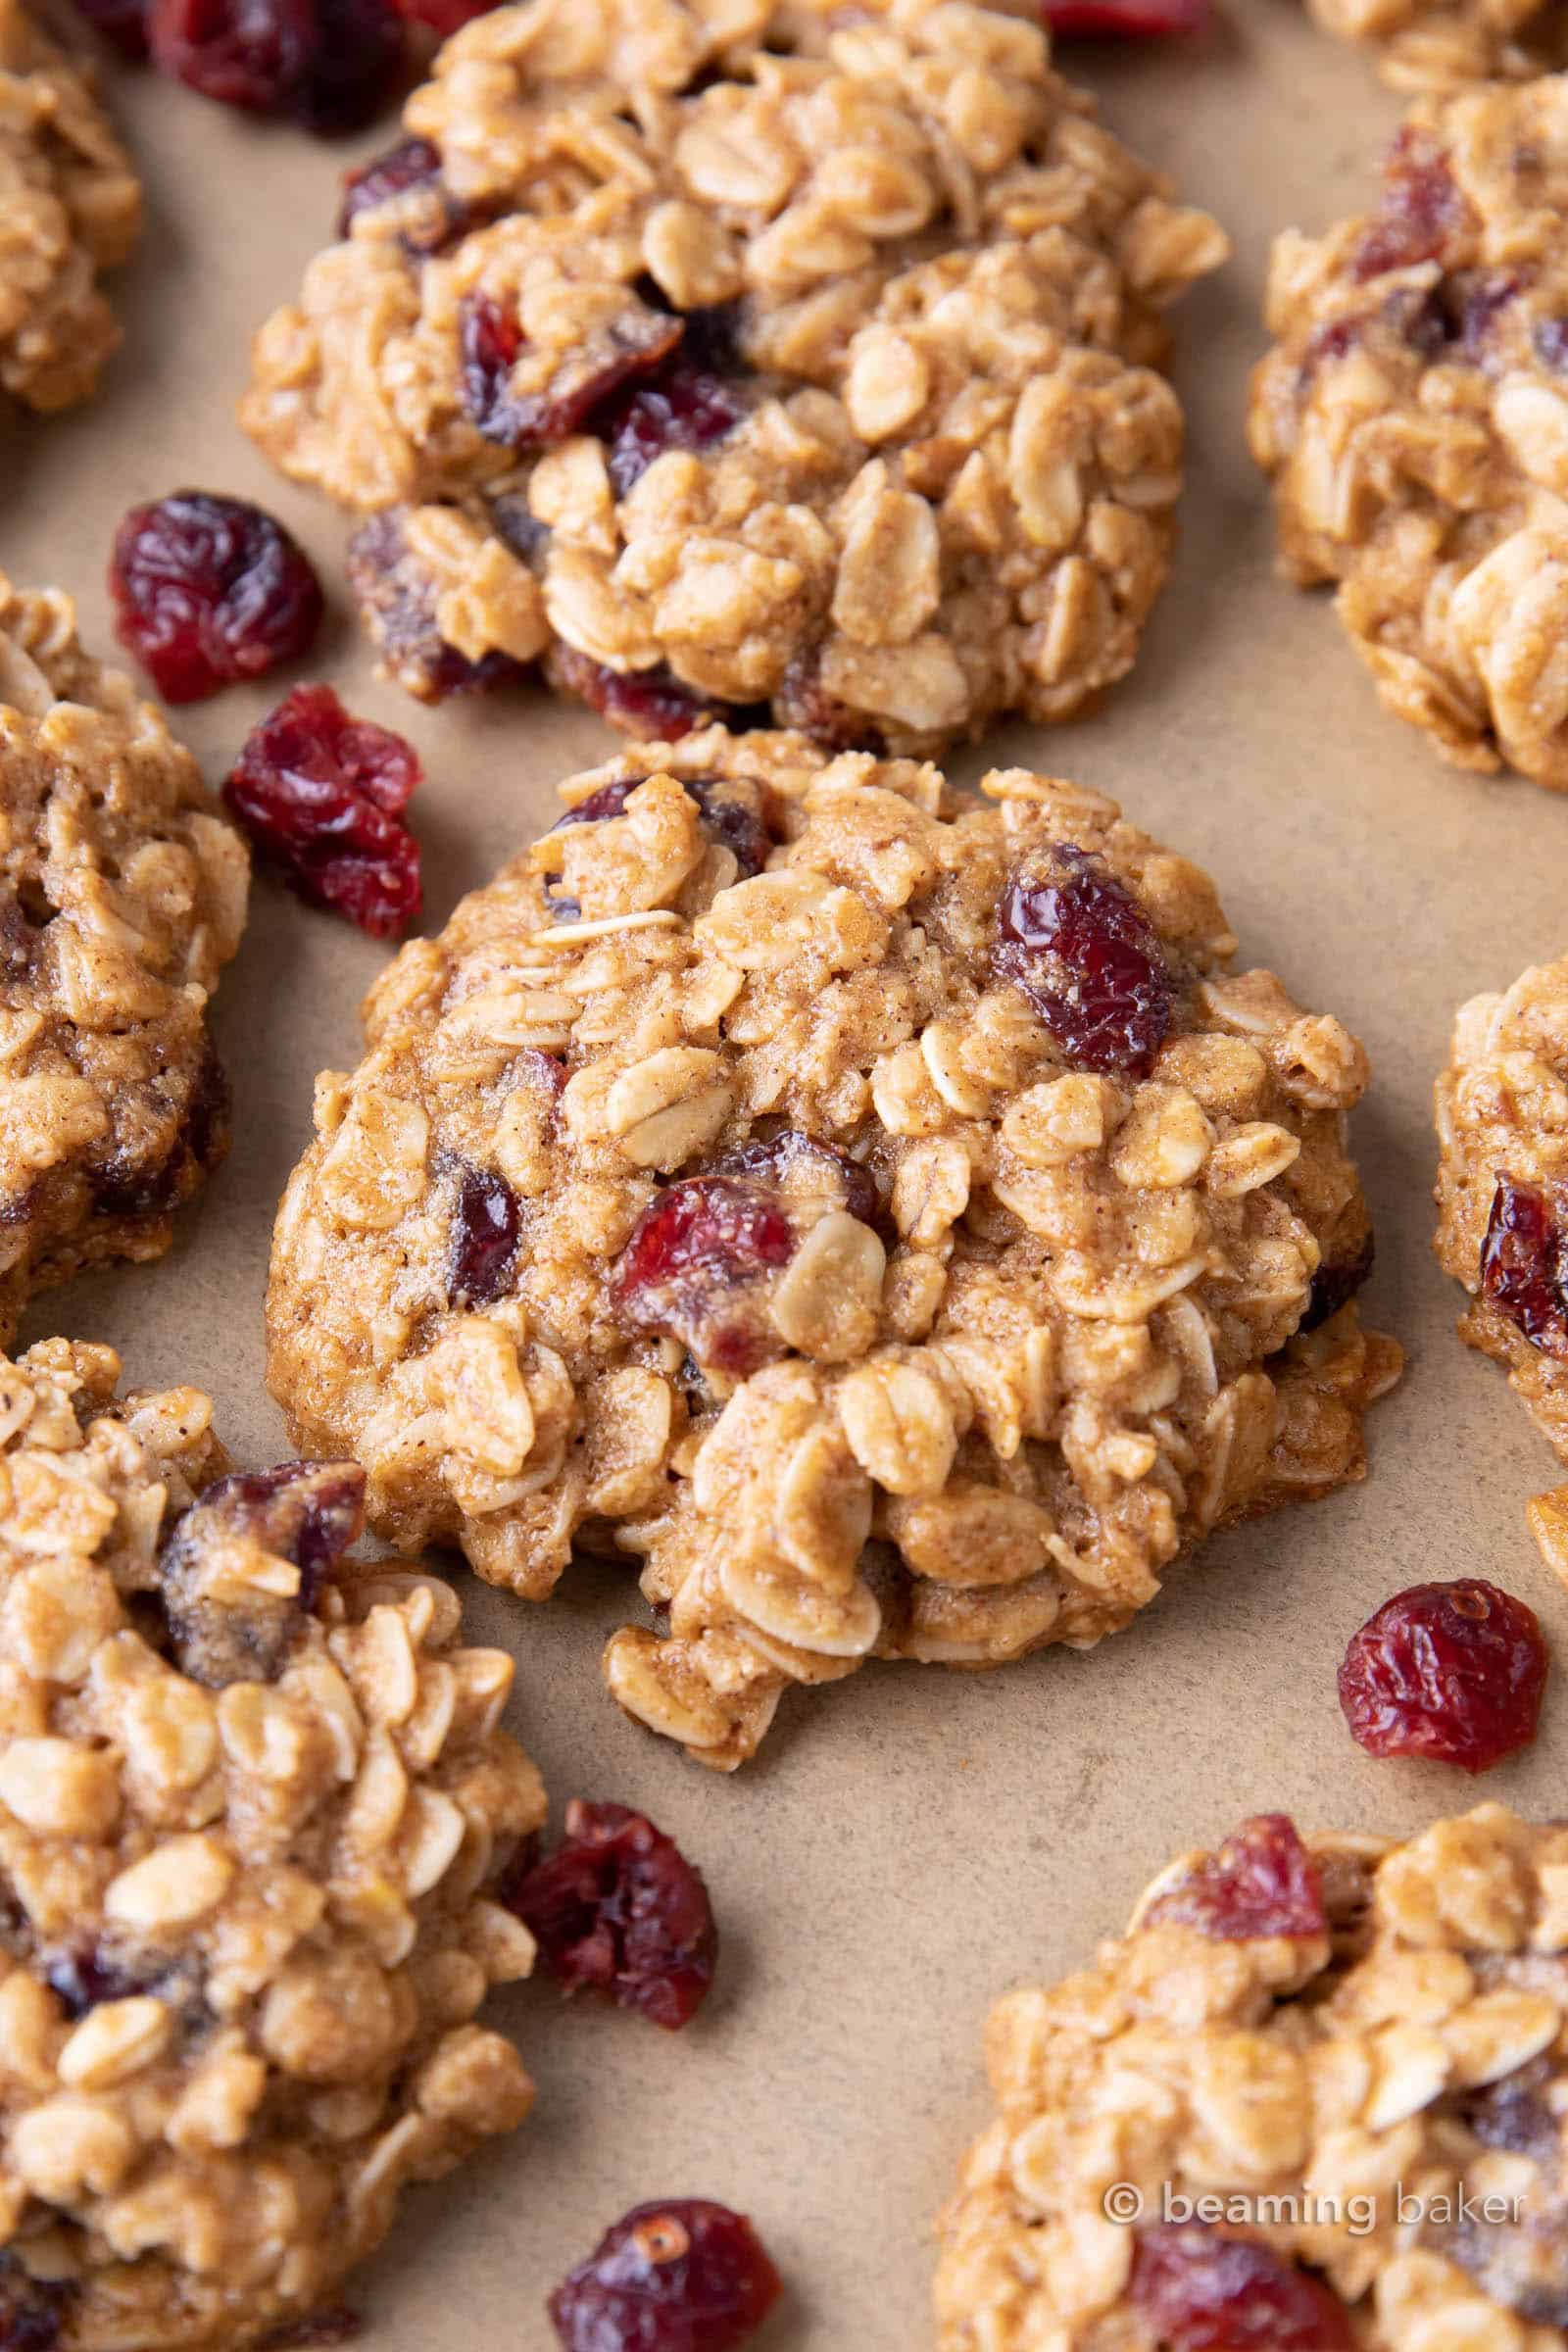 Healthy Oatmeal Cranberry Cookies: warm, cozy spices with chewy oats and sweet ‘n tart cranberries in the best vegan oatmeal cranberry cookies recipe! #Vegan #Healthy #Oatmeal #Cranberry #Cookies | Recipe at BeamingBaker.com